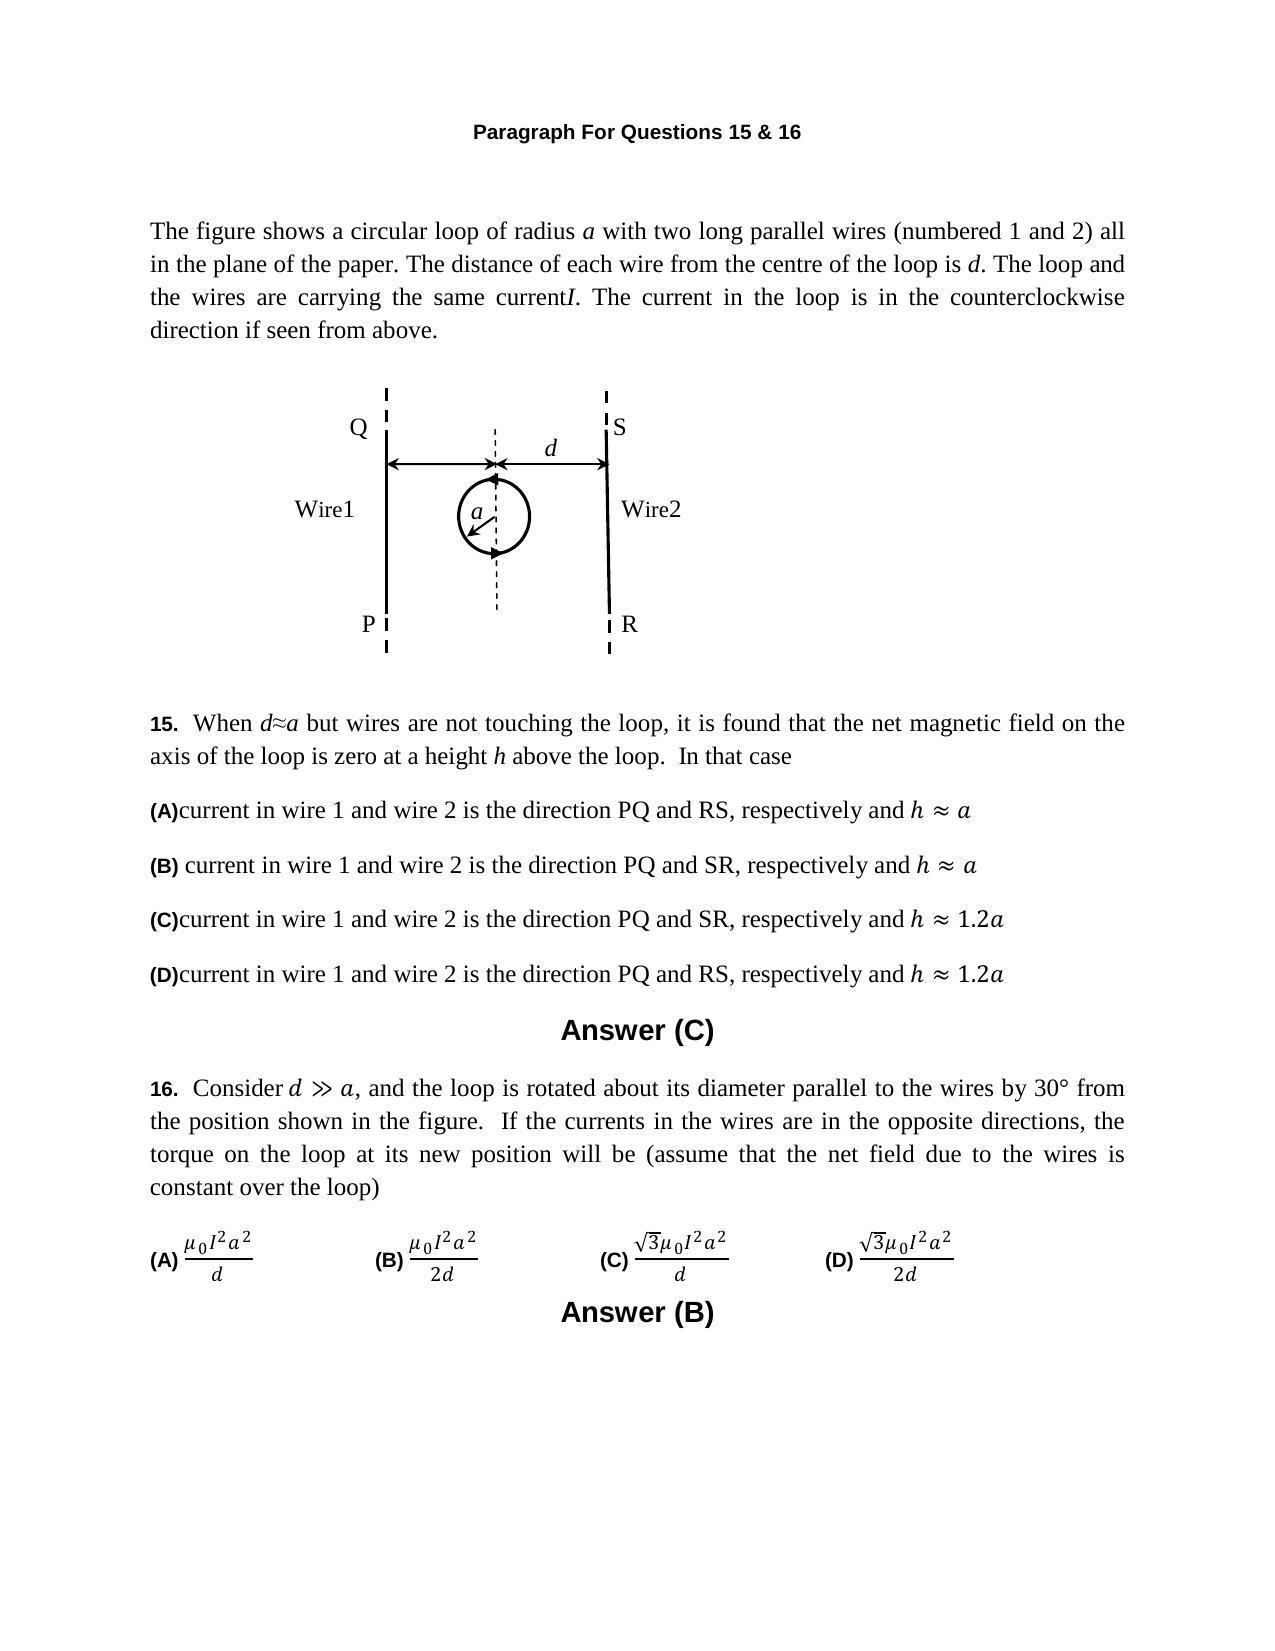 JEE (Advanced) 2014 Paper II Question Paper - Page 8